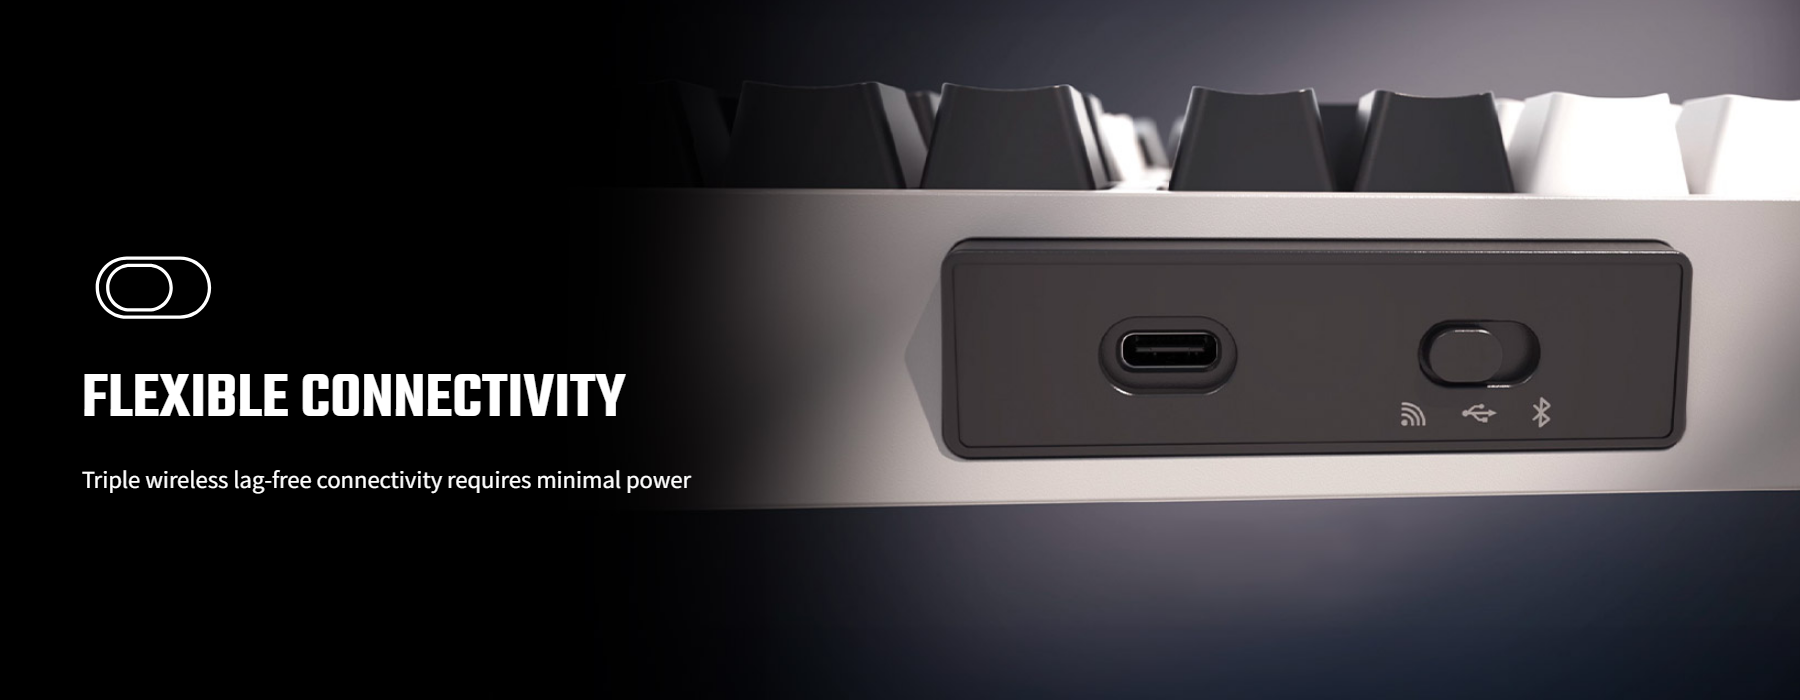 A large marketing image providing additional information about the product Cooler Master MK770 Space Grey Hybrid Wireless Keyboard - Kailh Box V2 White Switch - Additional alt info not provided